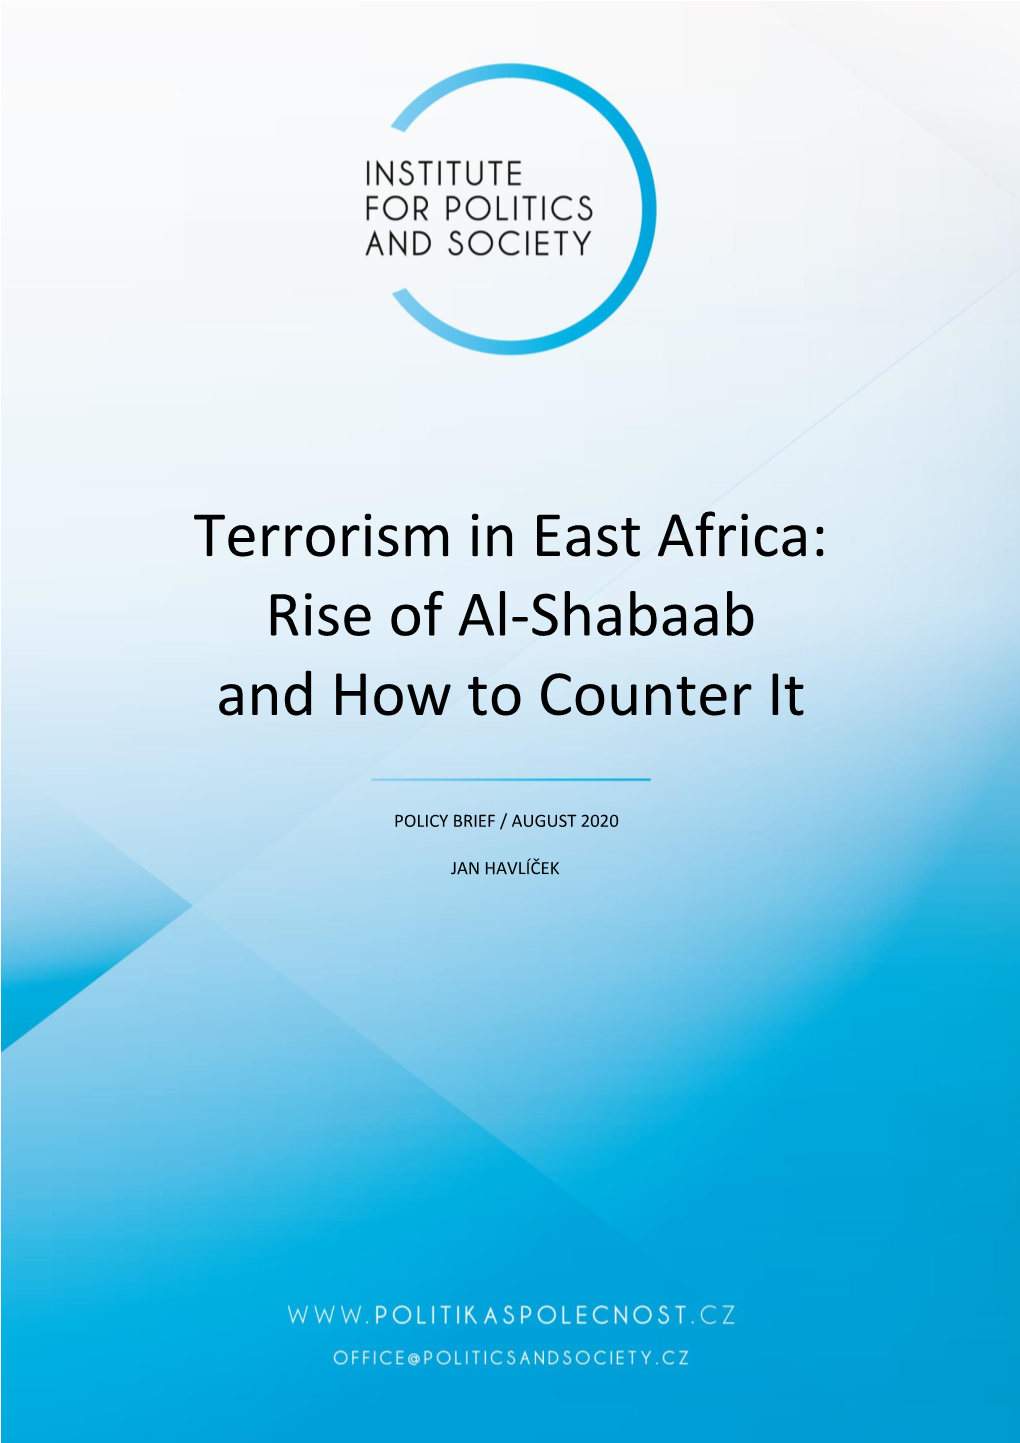 Terrorism in East Africa: Rise of Al-Shabaab and How to Counter It